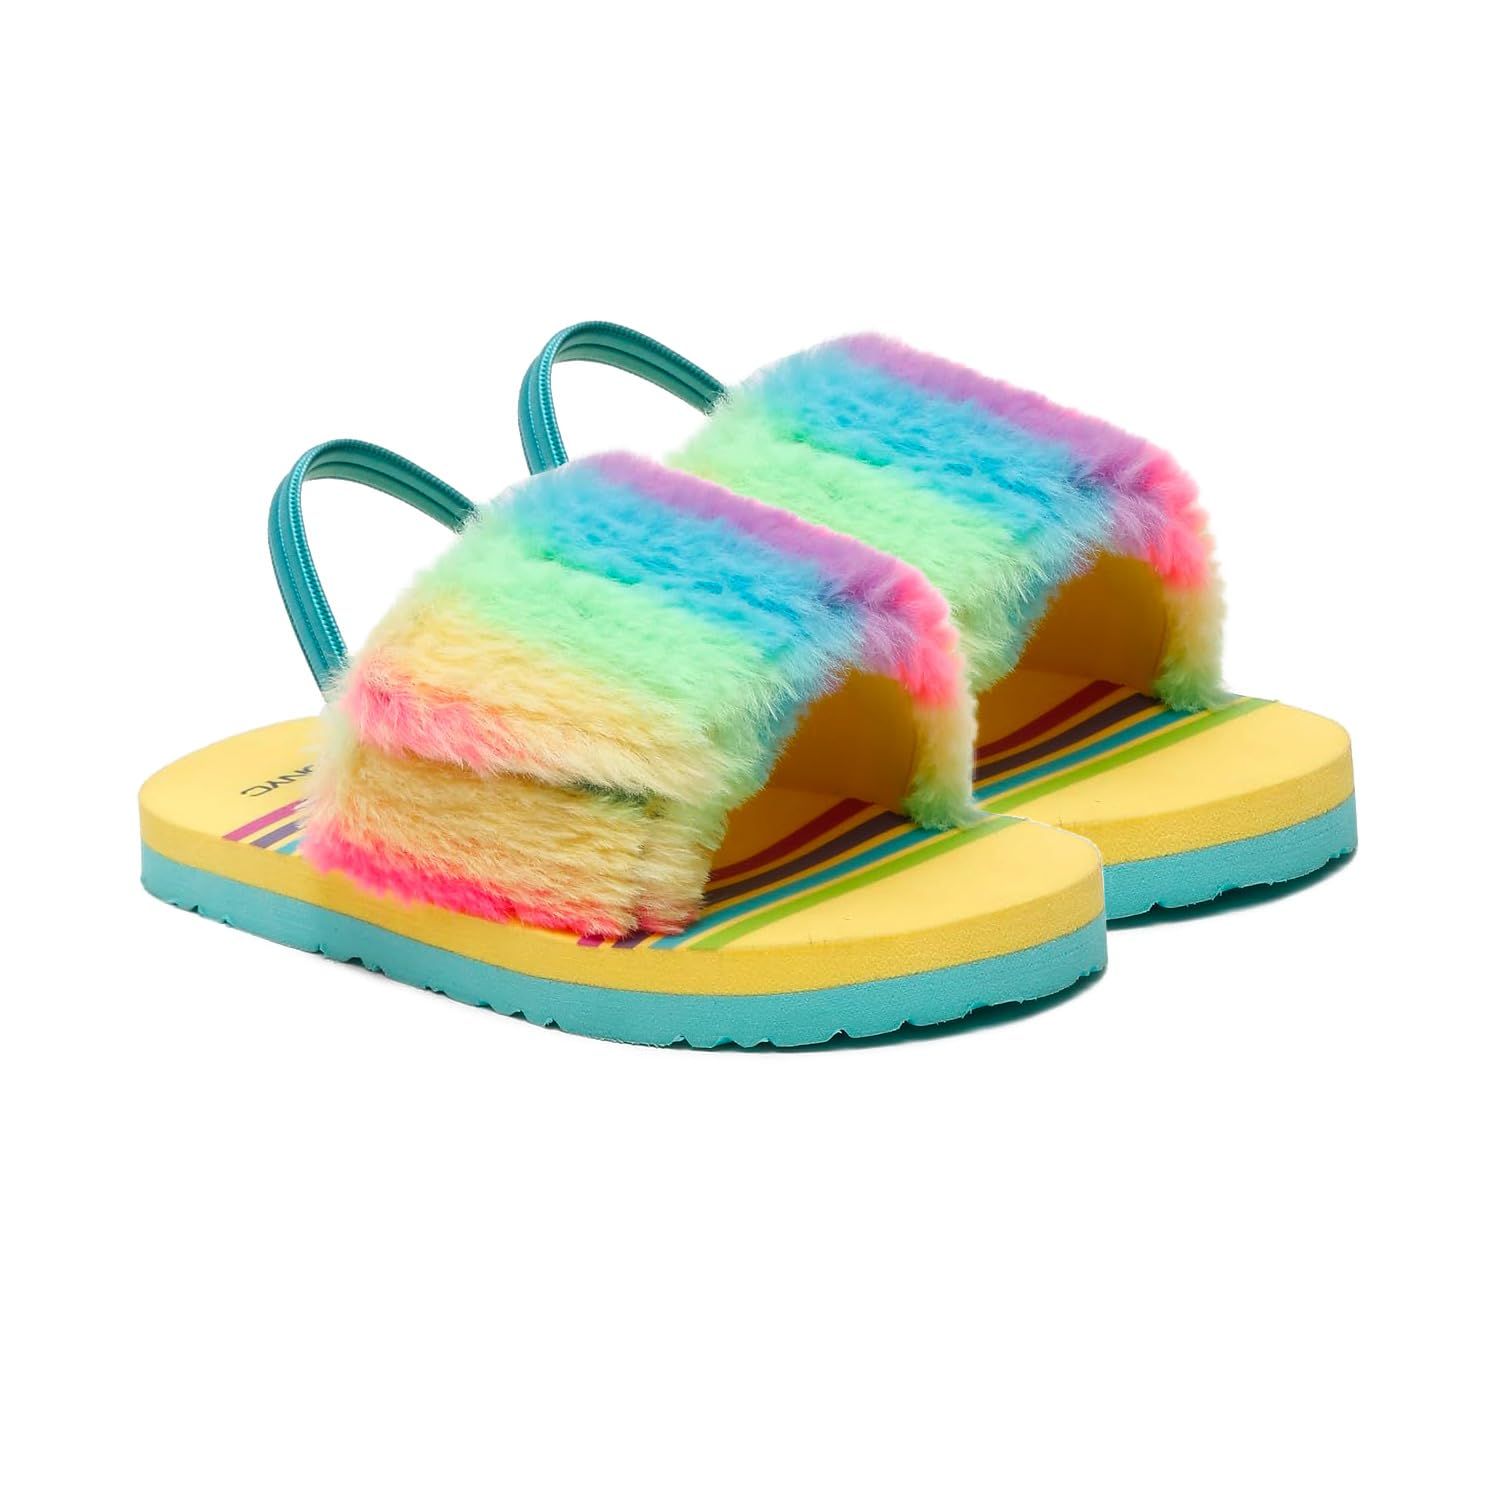 ONYC Kids Rainbow Slippers for Girls with Adjustable Strap - Yellow